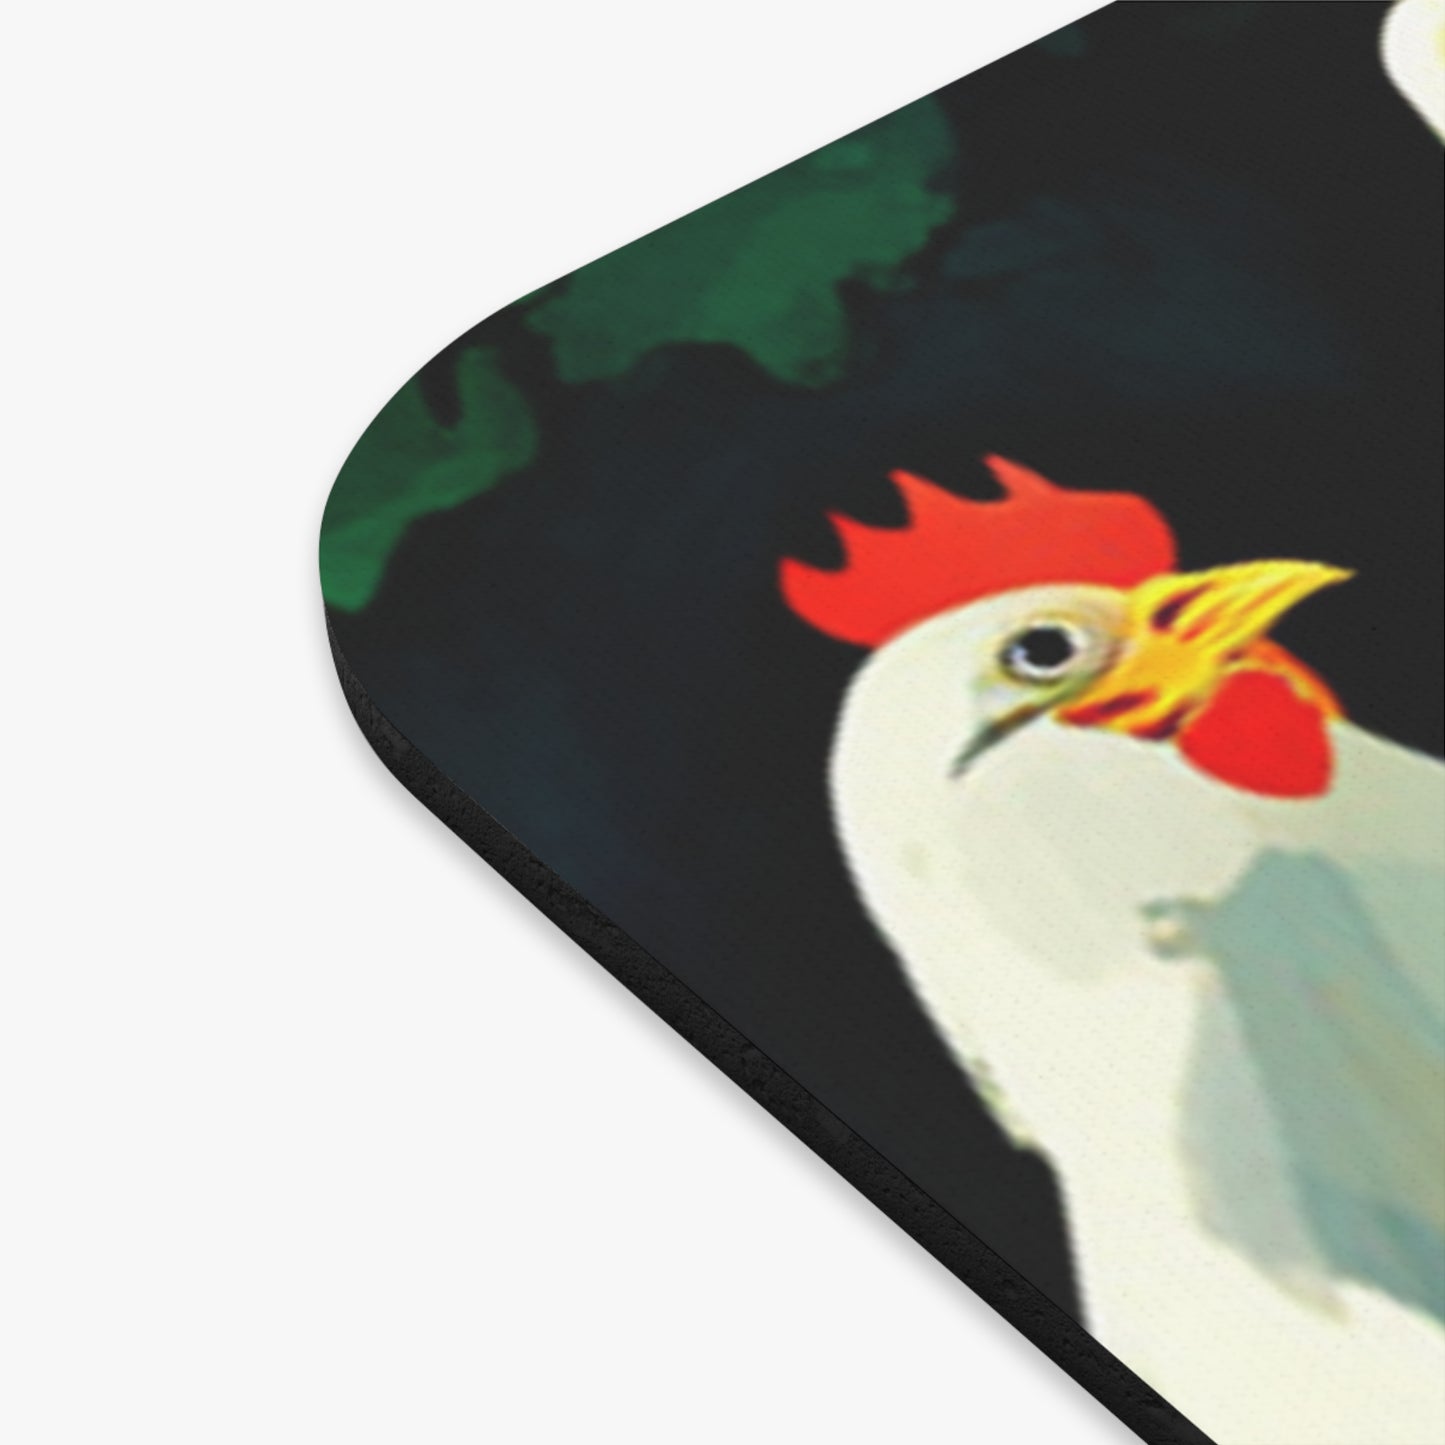 Chickens Mouse Pad